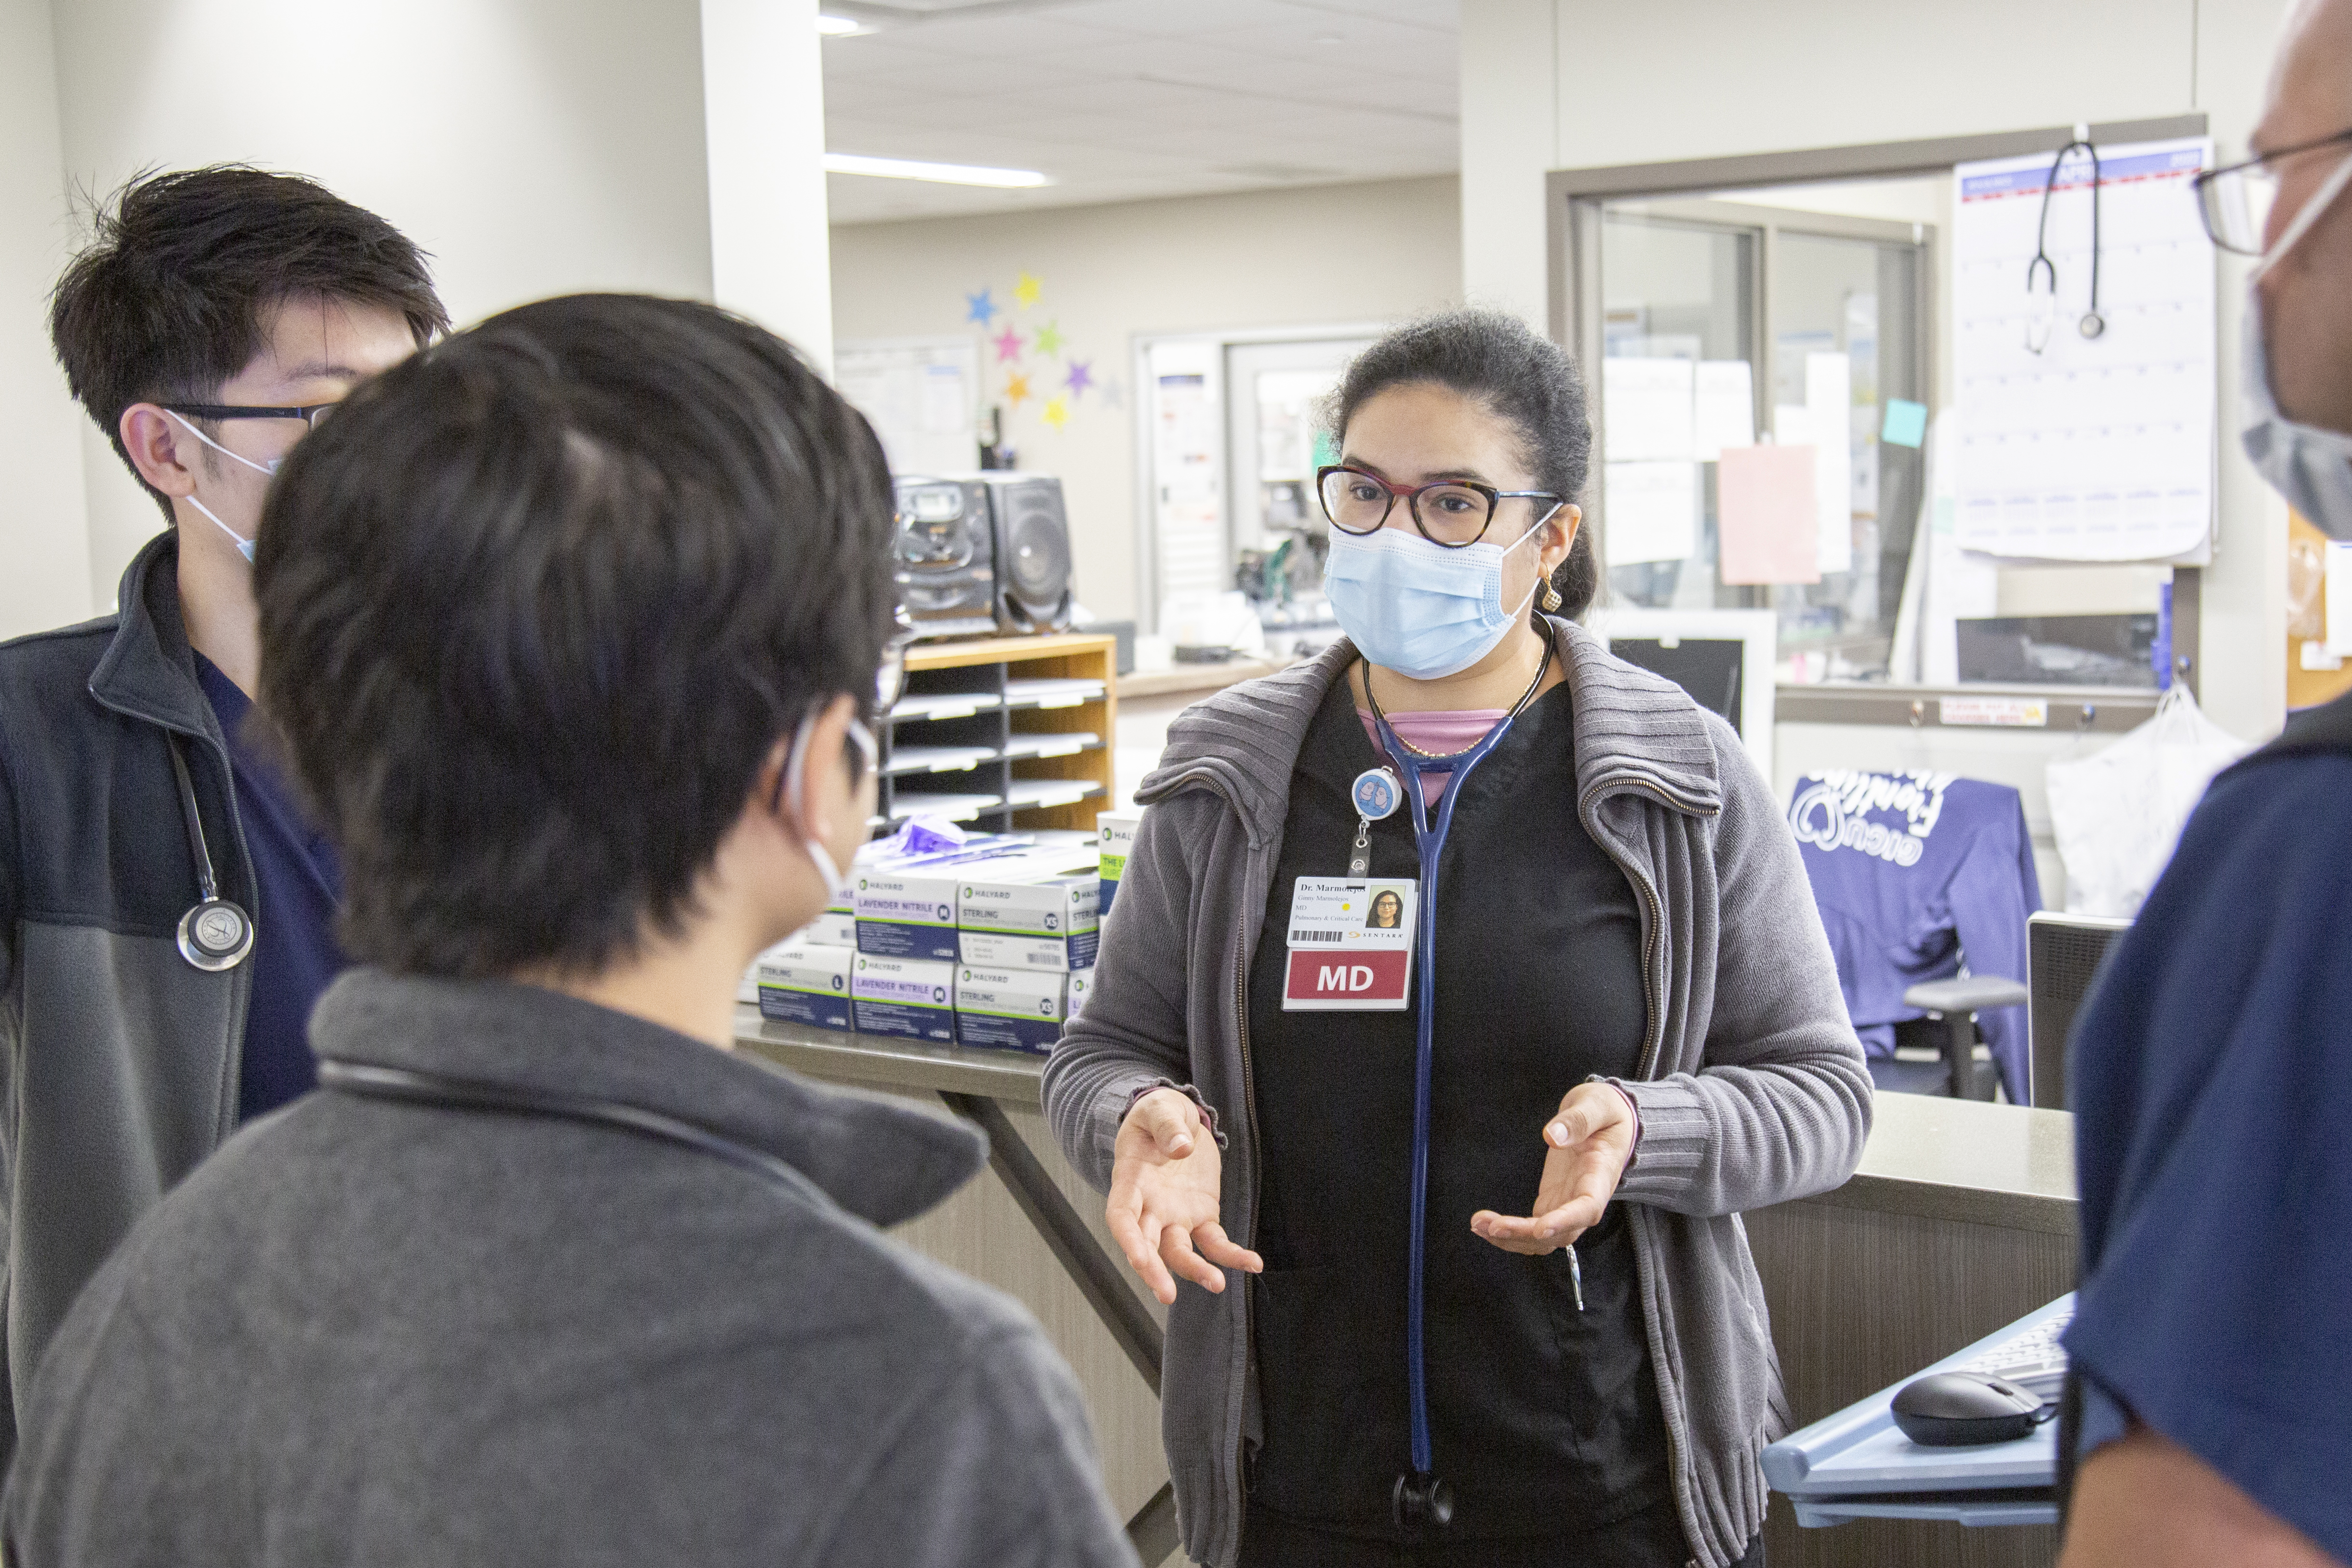 A female doctor explaining something to 3 other health care professionals with a mask.